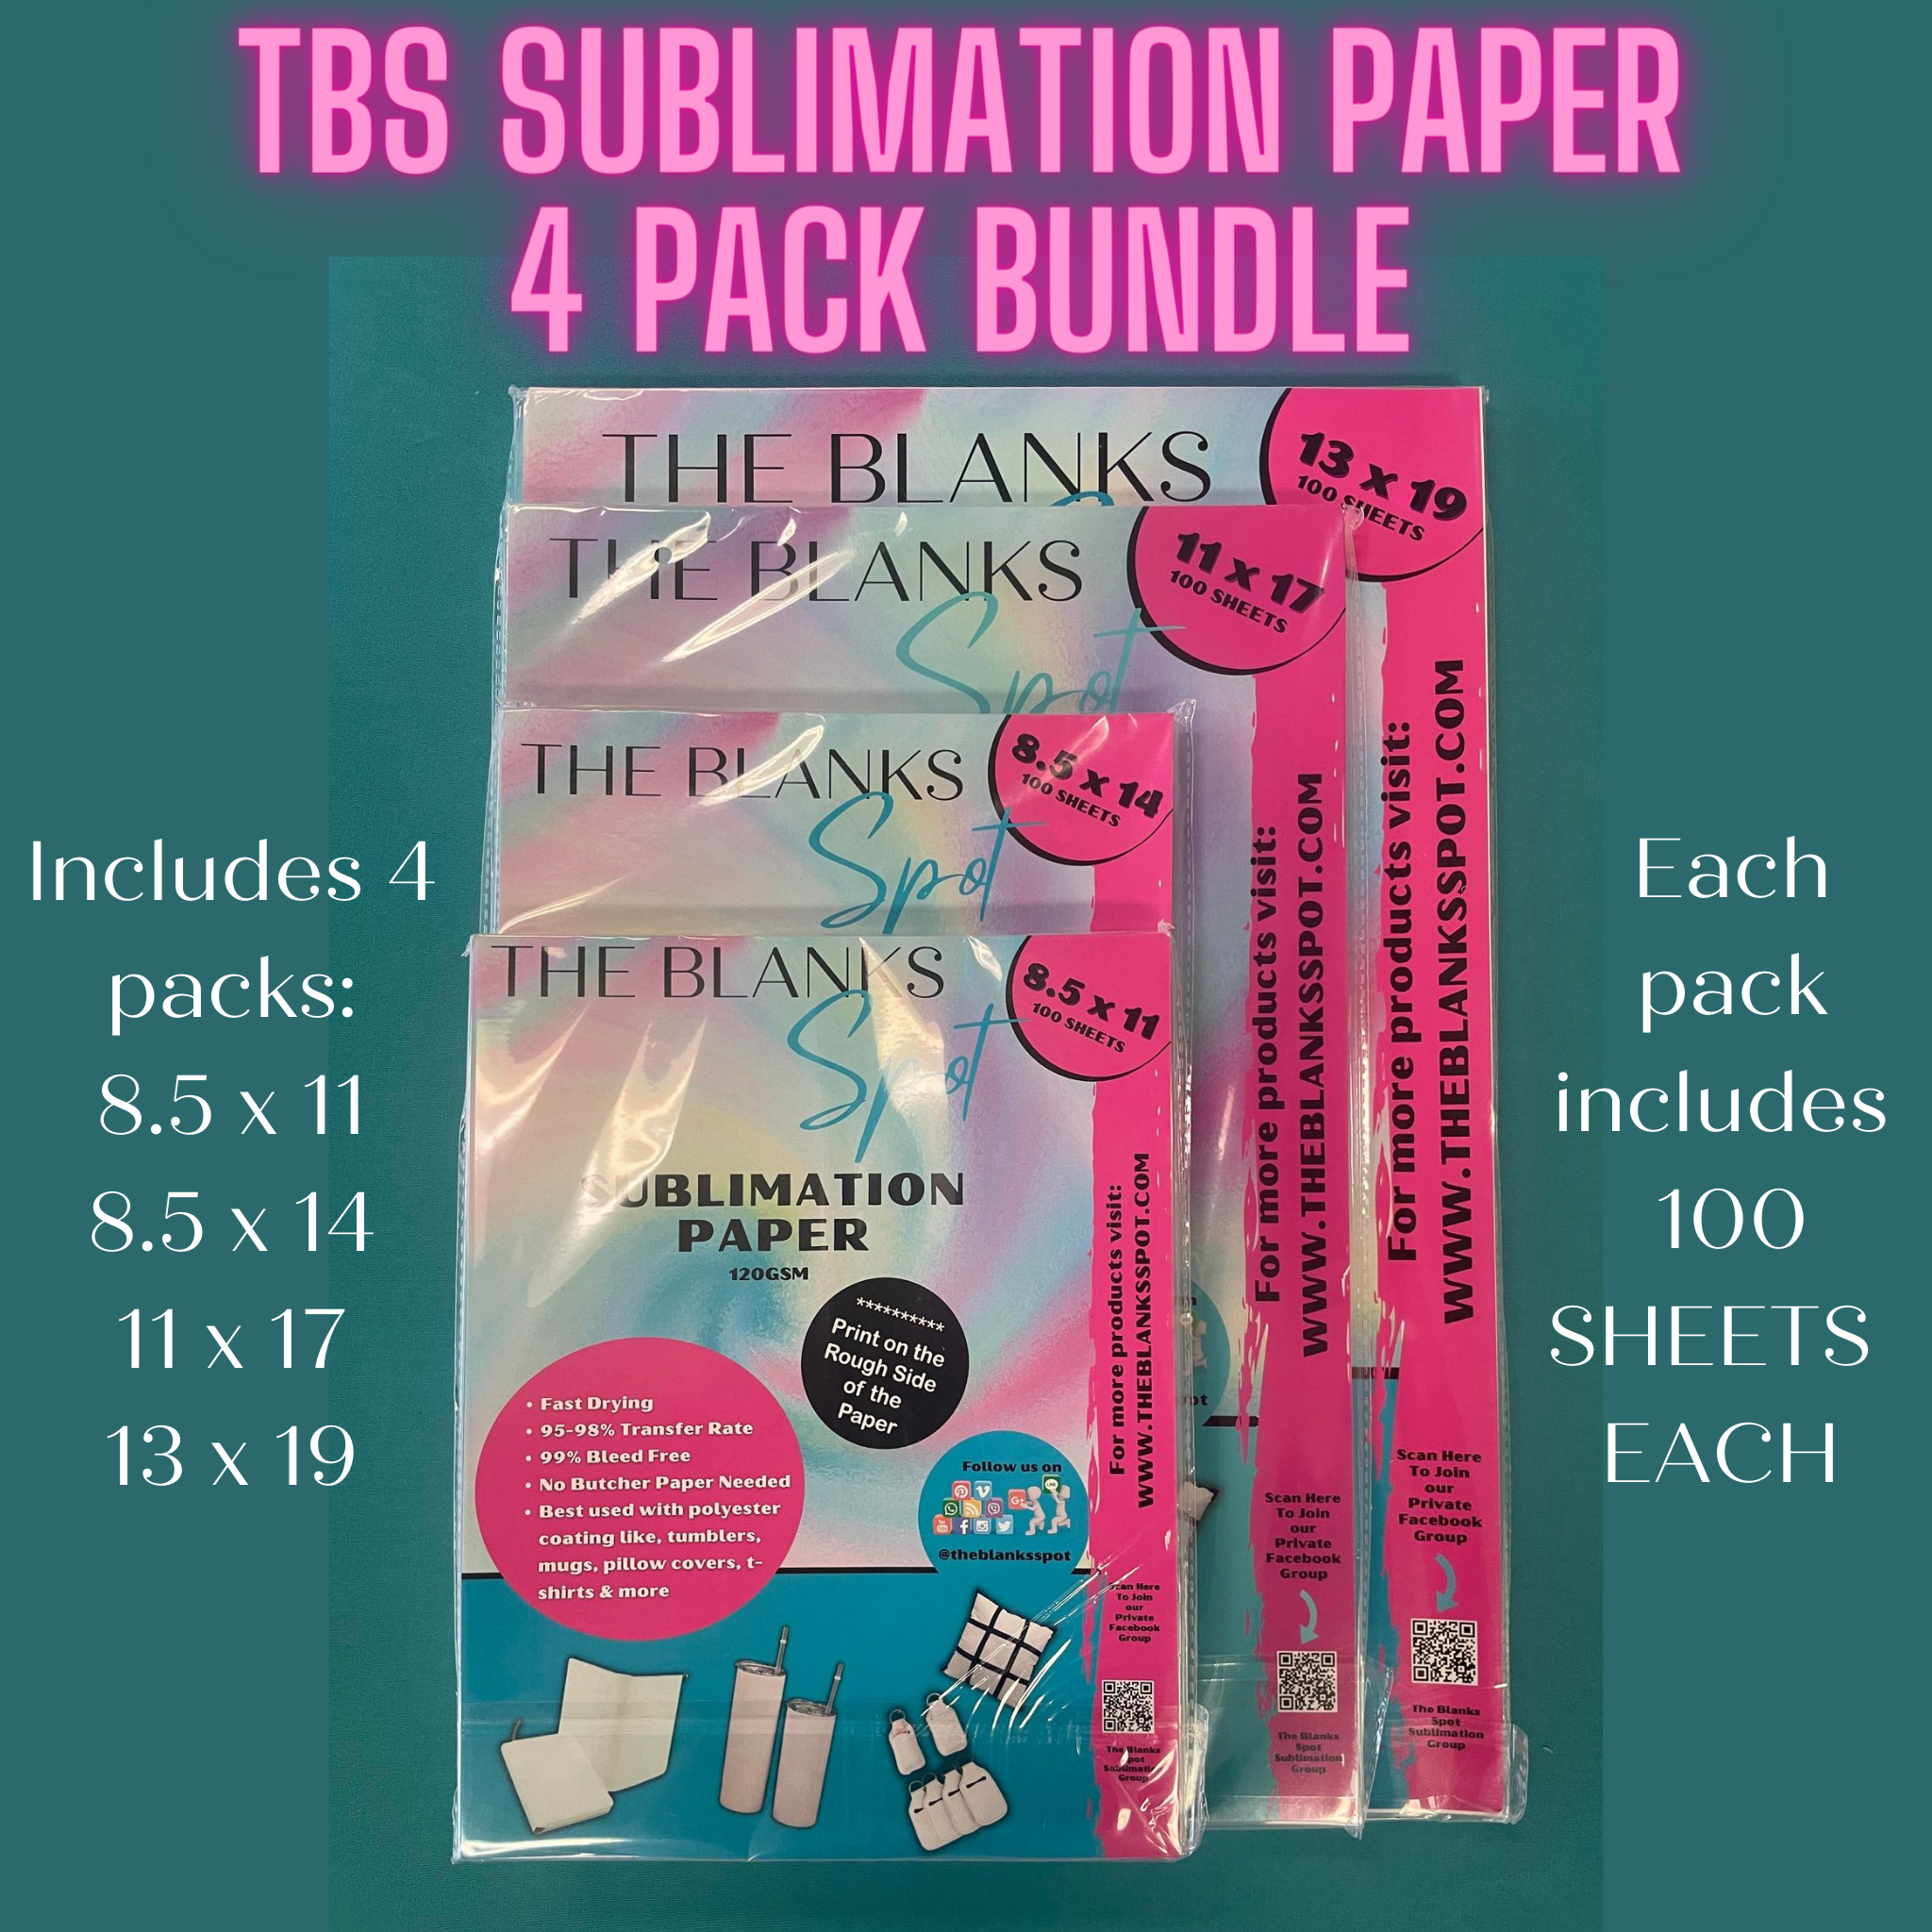 TBS SUBLIMATION PAPER 4 PACK BUNDLE (1 Full Pack Each Size) – The